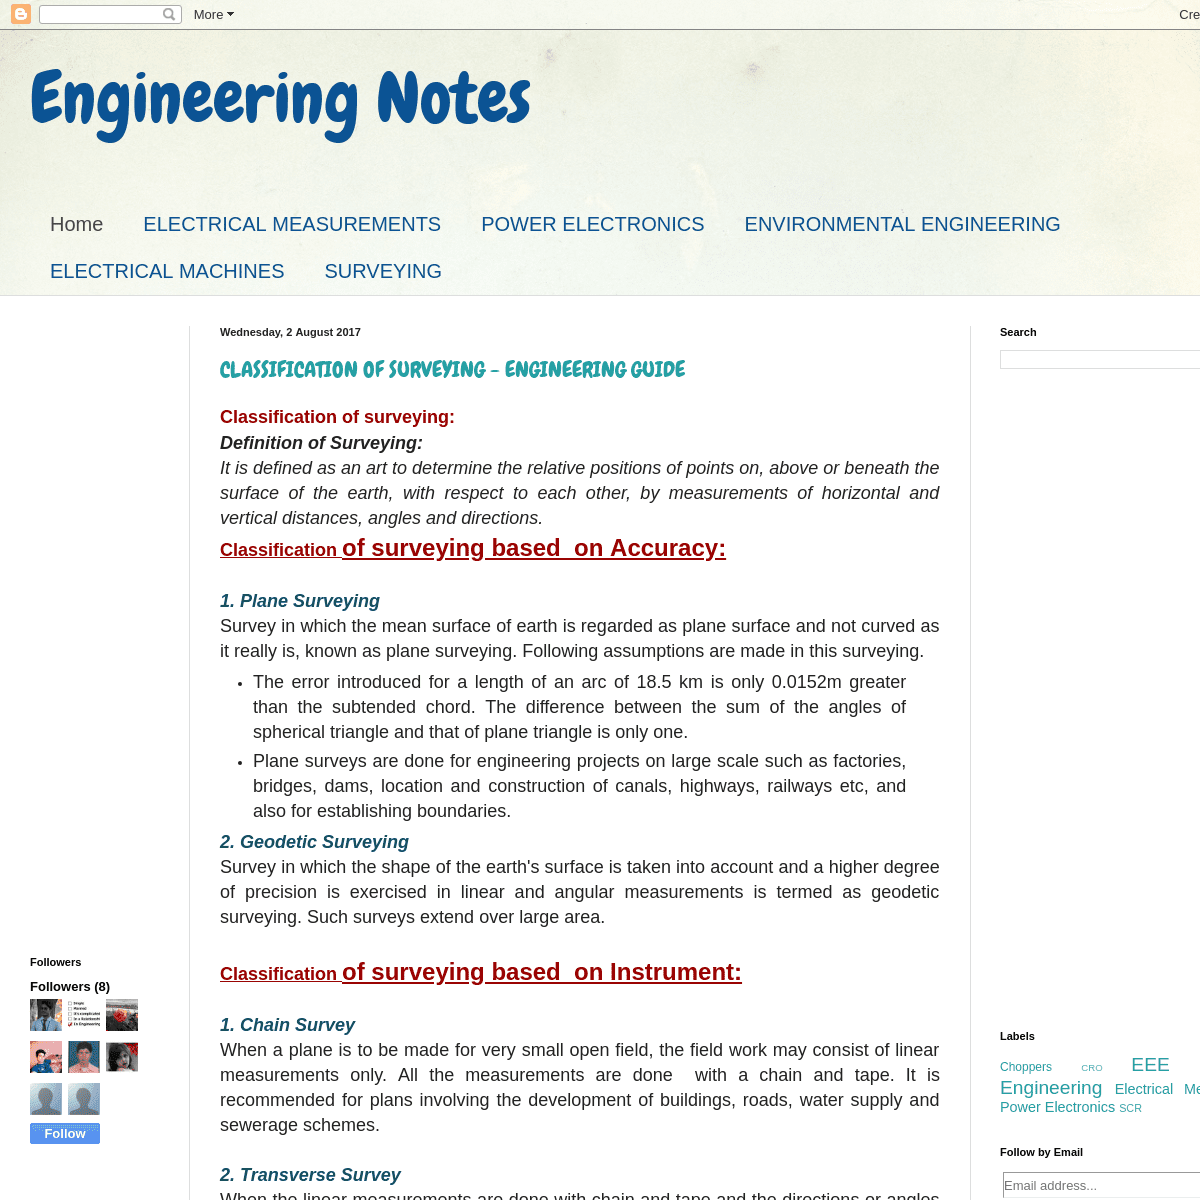 A complete backup of engineeringwrittennotes.blogspot.com